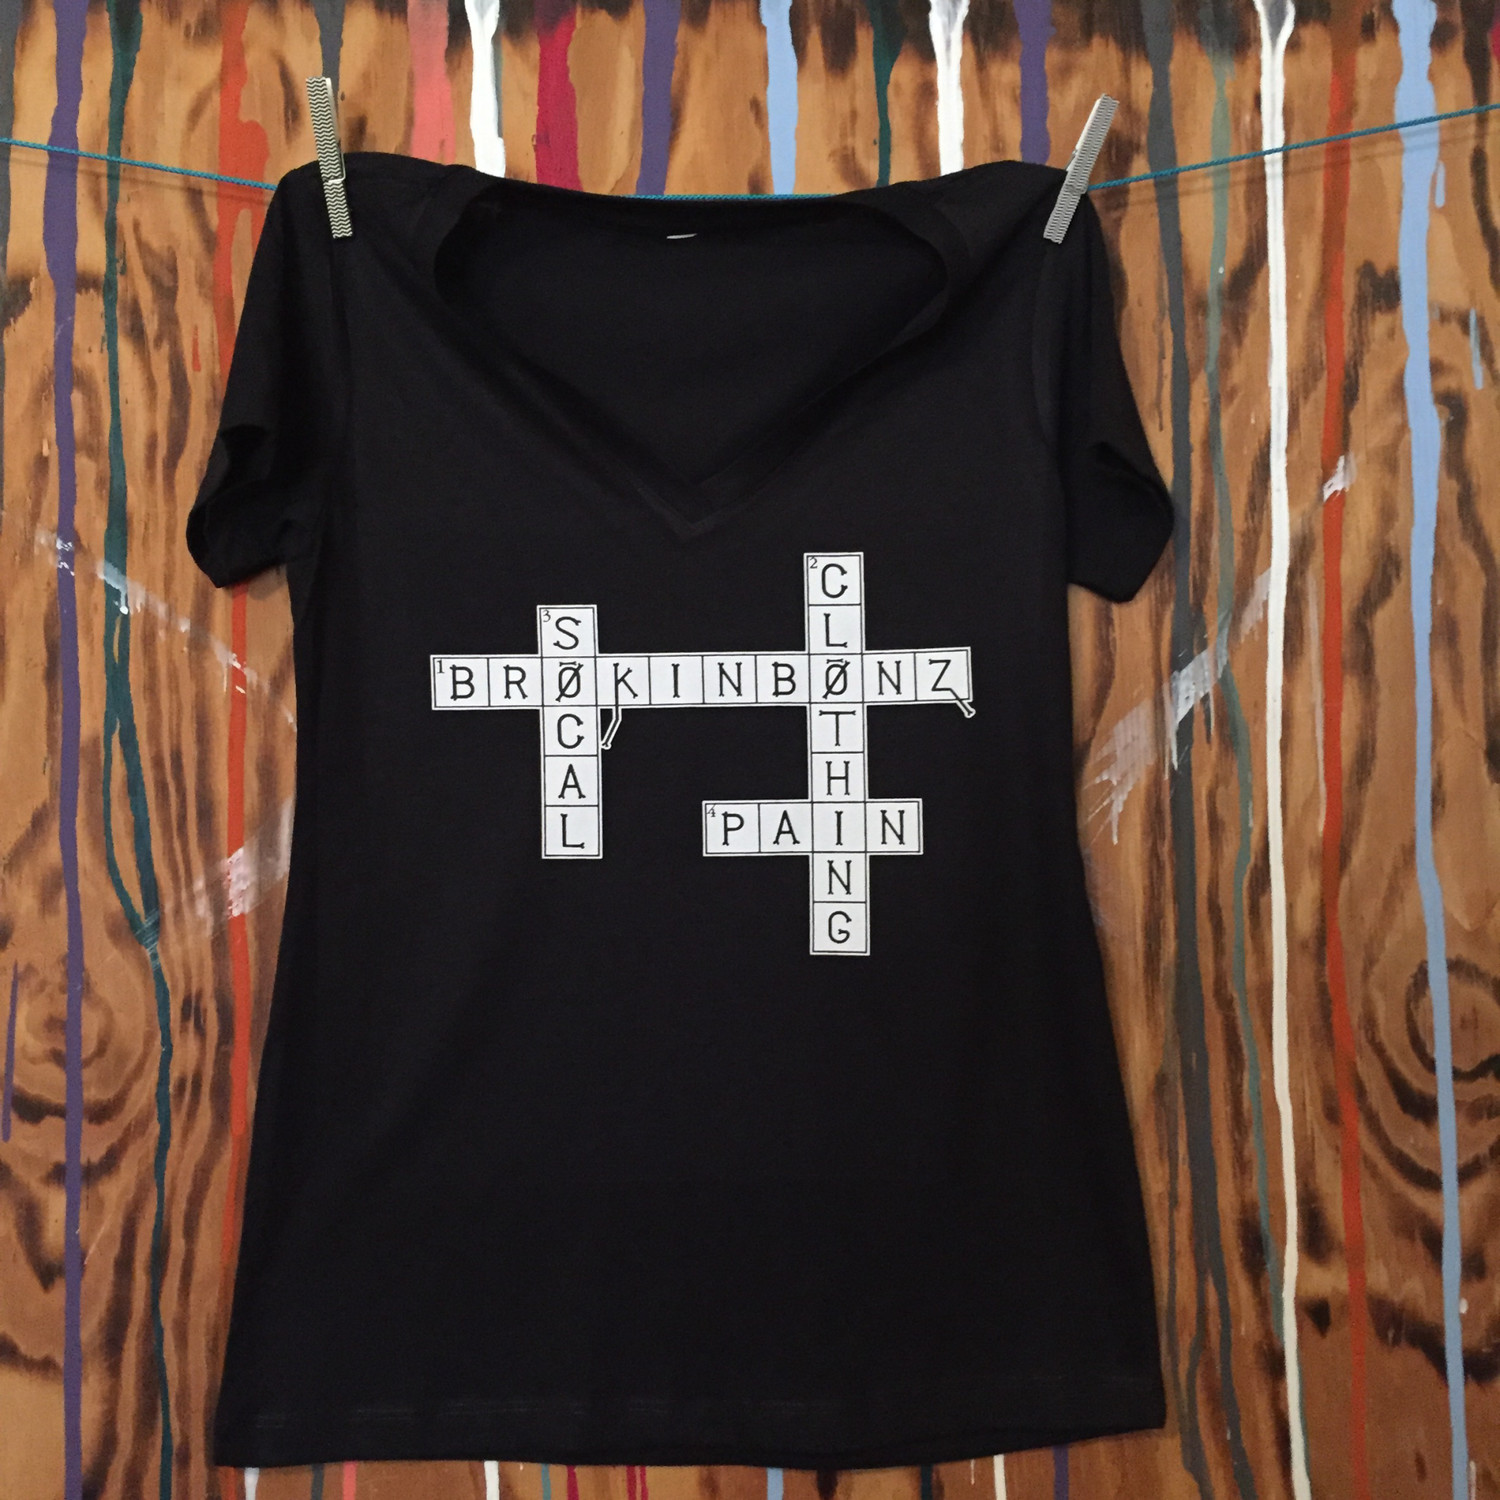 CROSSWORD PUZZLE Women's V-Neck...Available with custom fraction